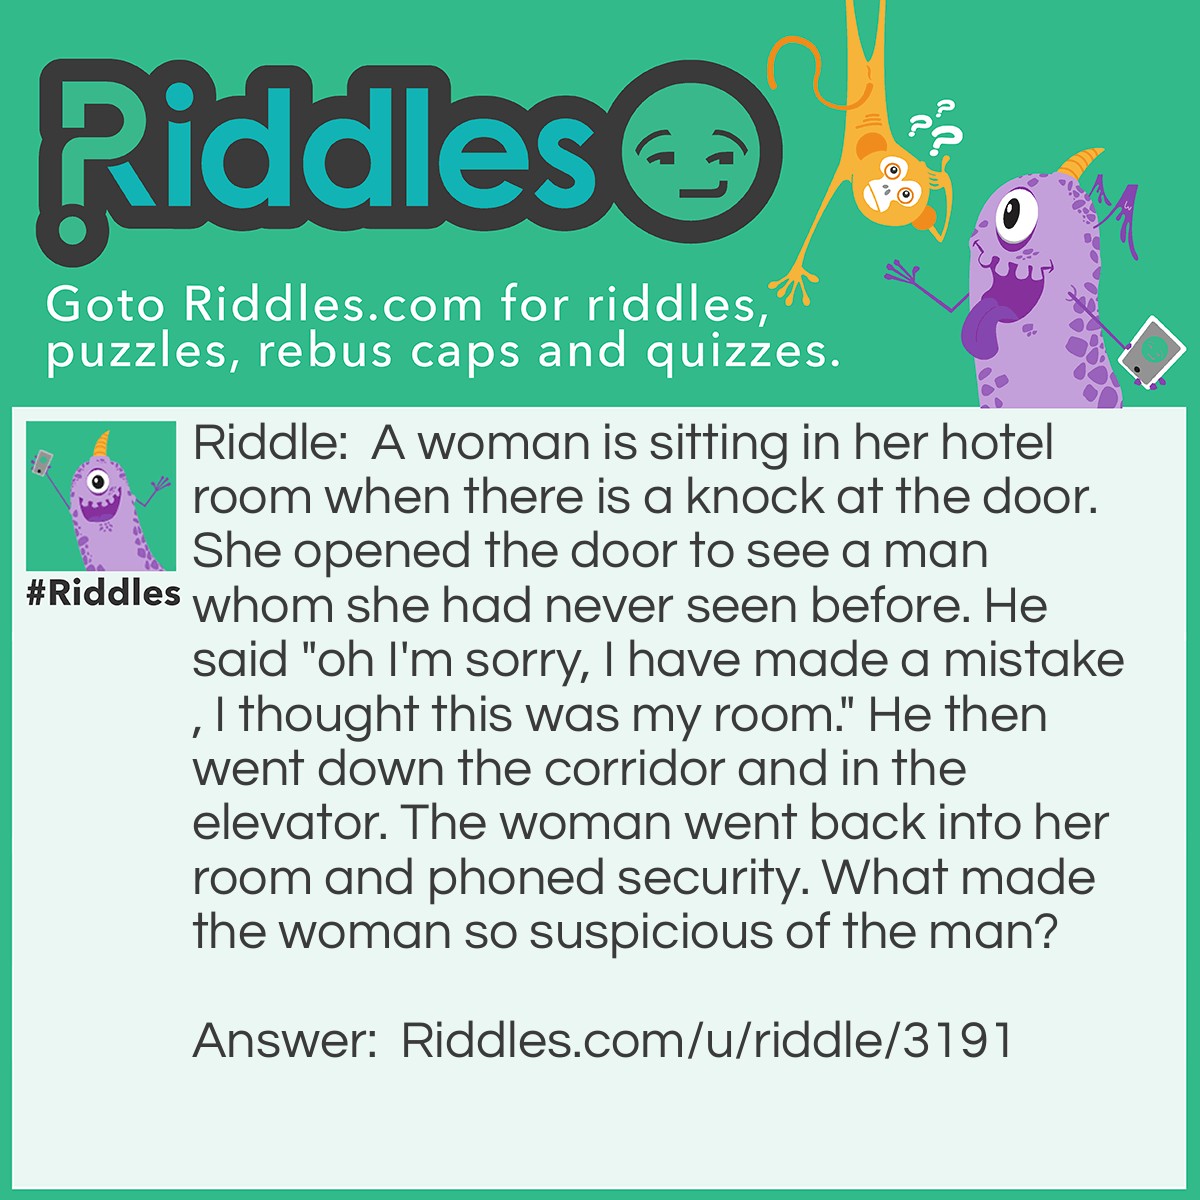 Riddle: A woman is sitting in her hotel room when there is a knock at the door. She opened the door to see a man whom she had never seen before. He said "oh I'm sorry, I have made a mistake, I thought this was my room." He then went down the corridor and in the elevator. The woman went back into her room and phoned security. What made the woman so suspicious of the man? Answer: You don't knock on your own hotel room door.